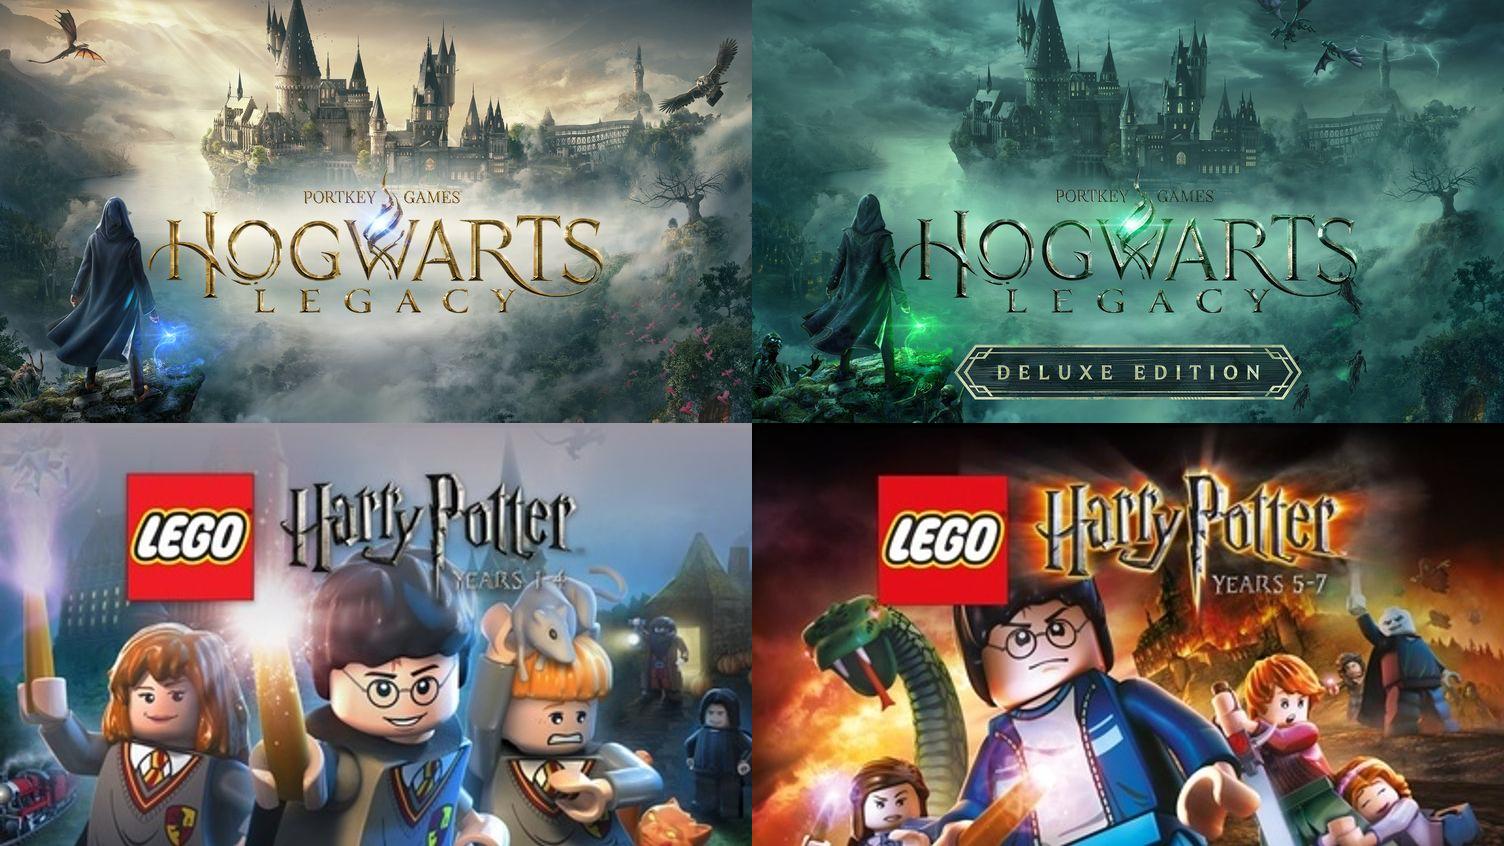 Hogwarts Legacy: Deluxe Edition PC @ 18% discount at Green man